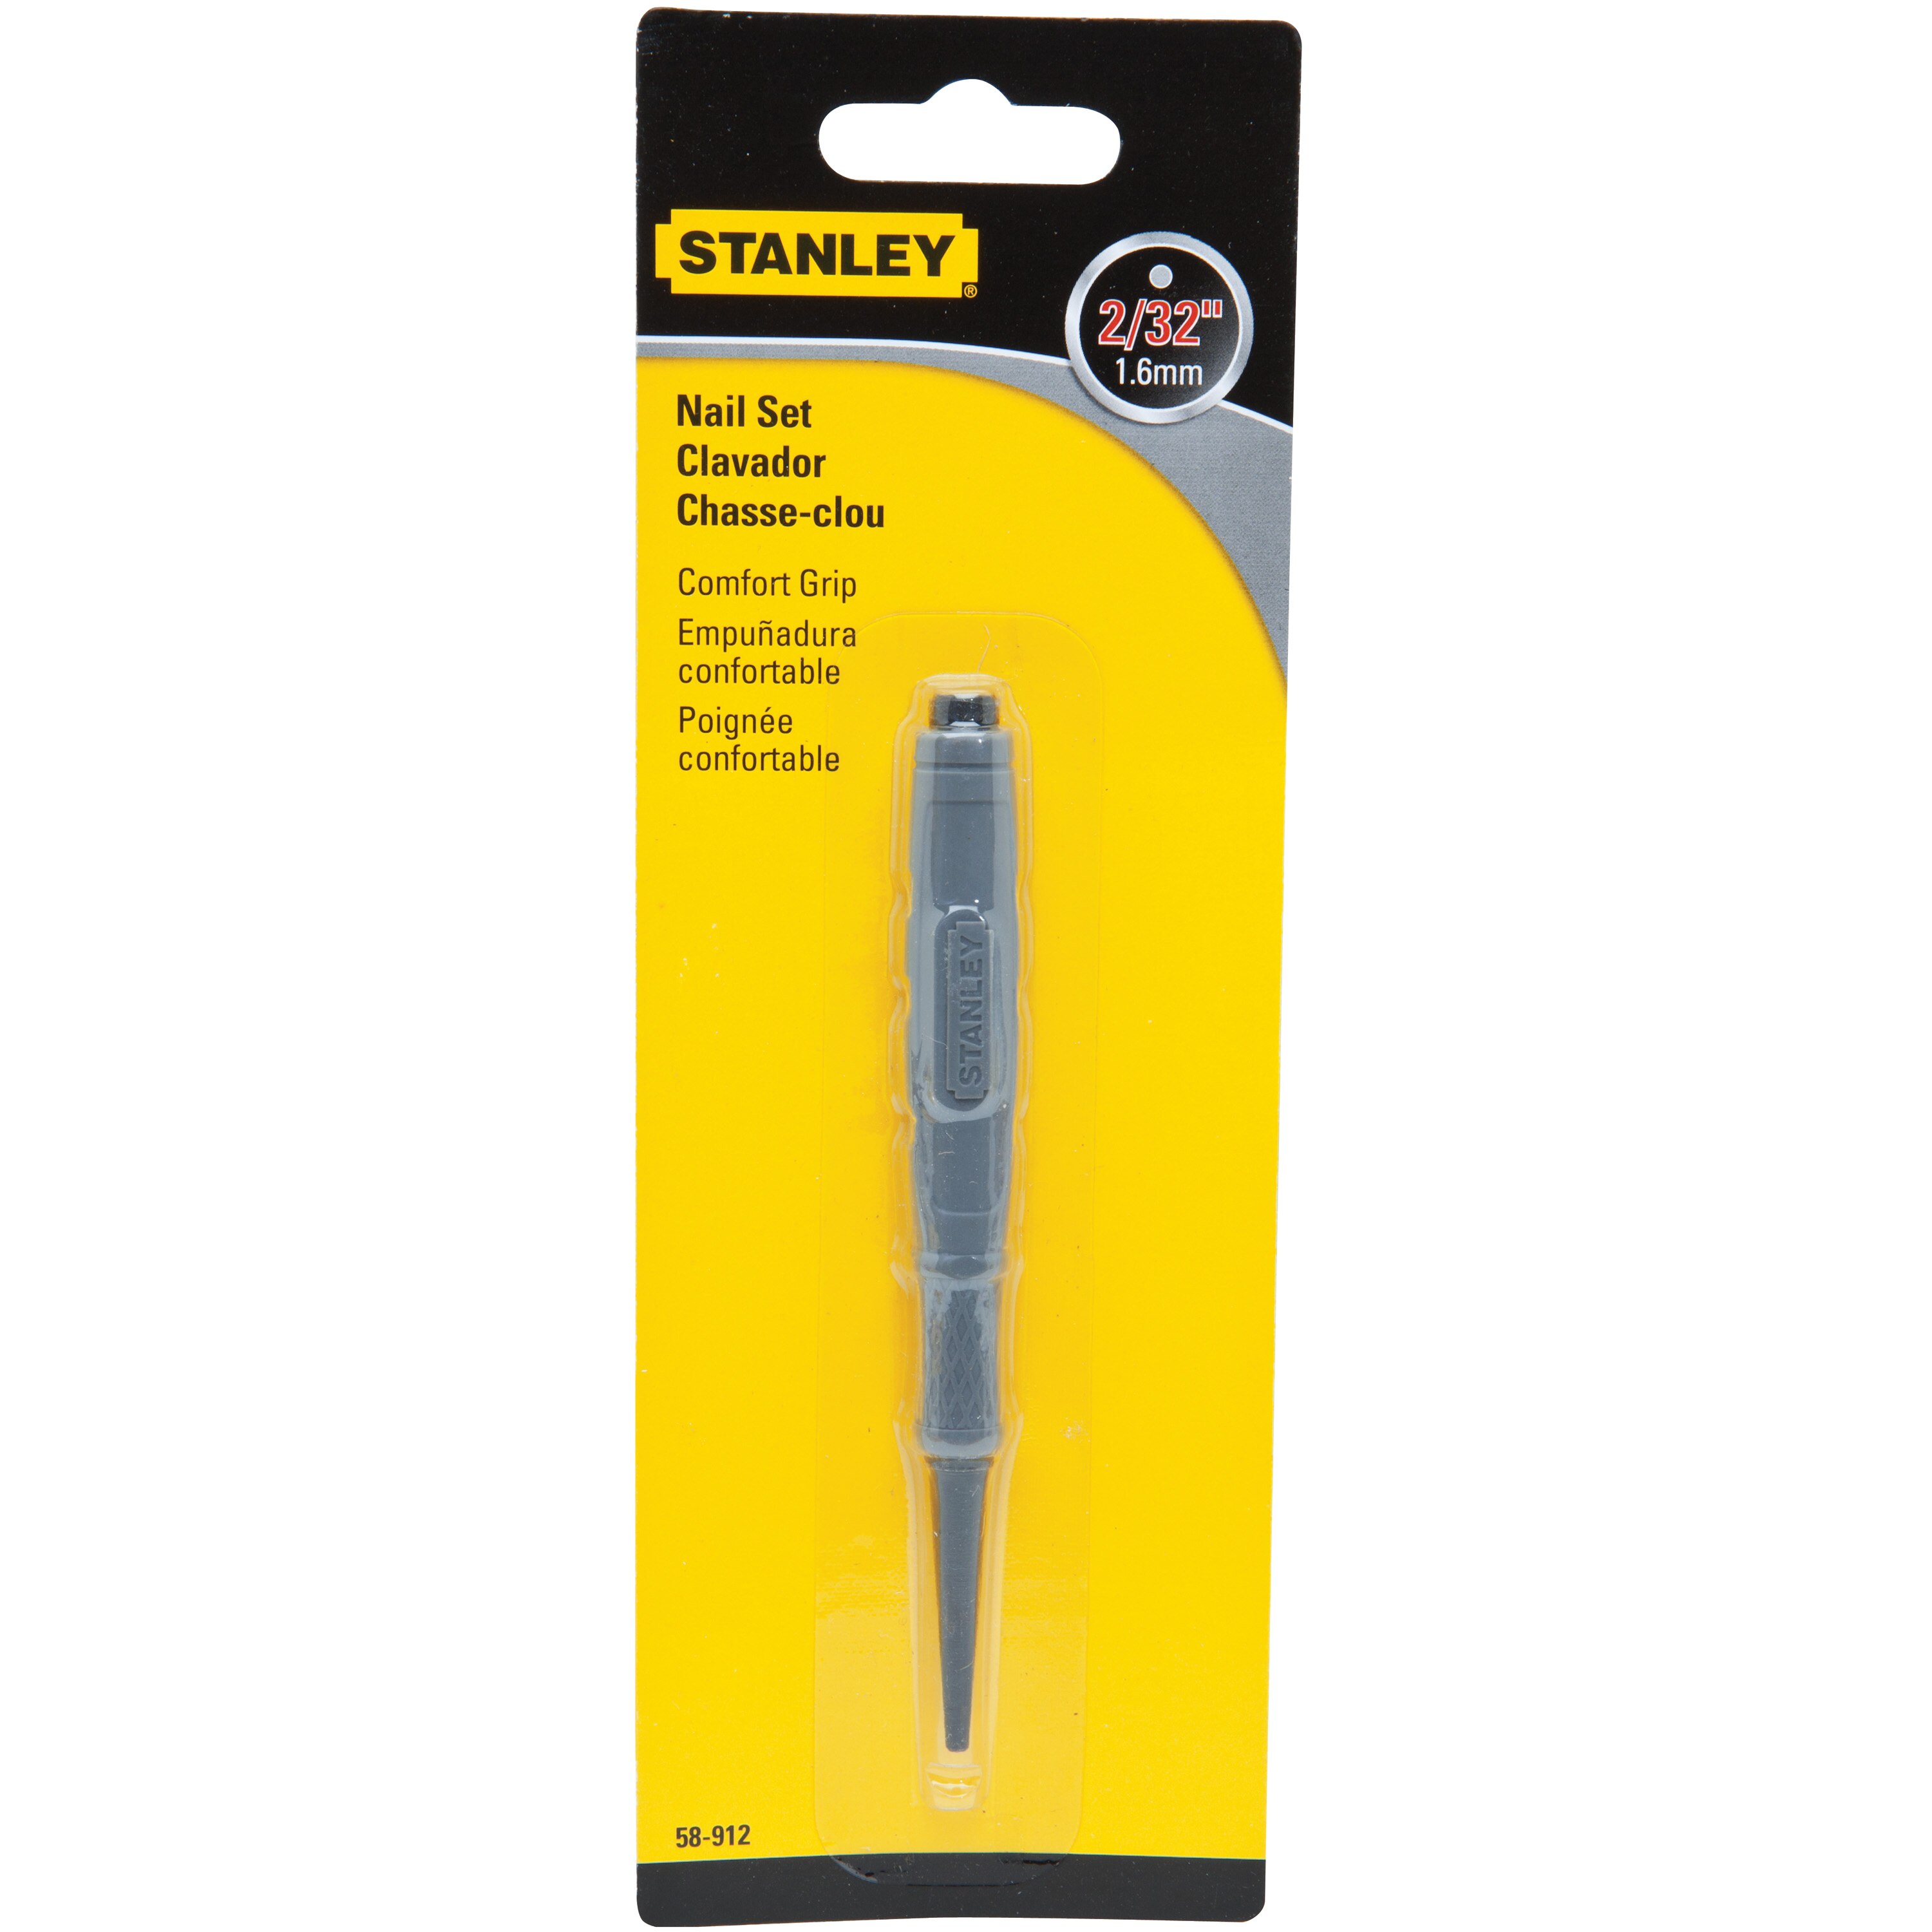 Dynagrip Nail Punch No120x1.6mm Stanley - 2